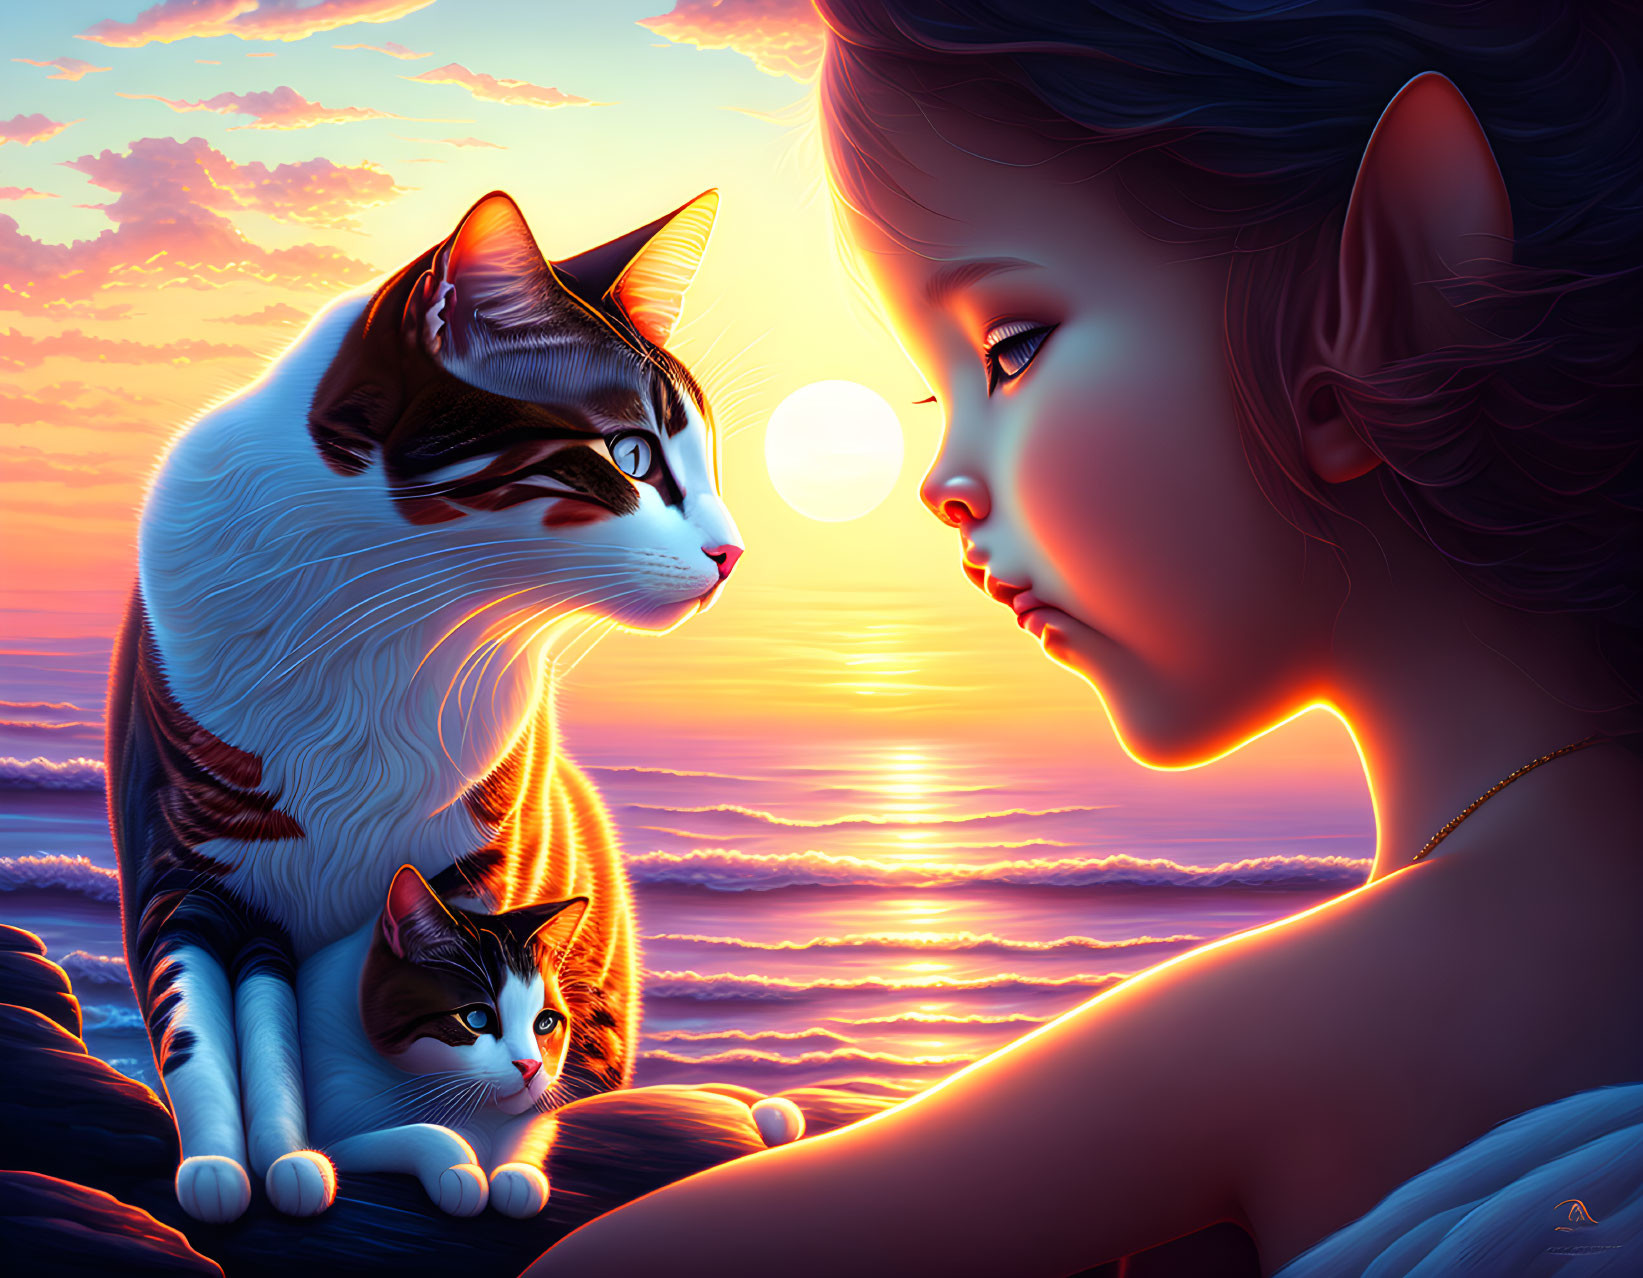 Digital artwork of girl with large cat and ocean sunset